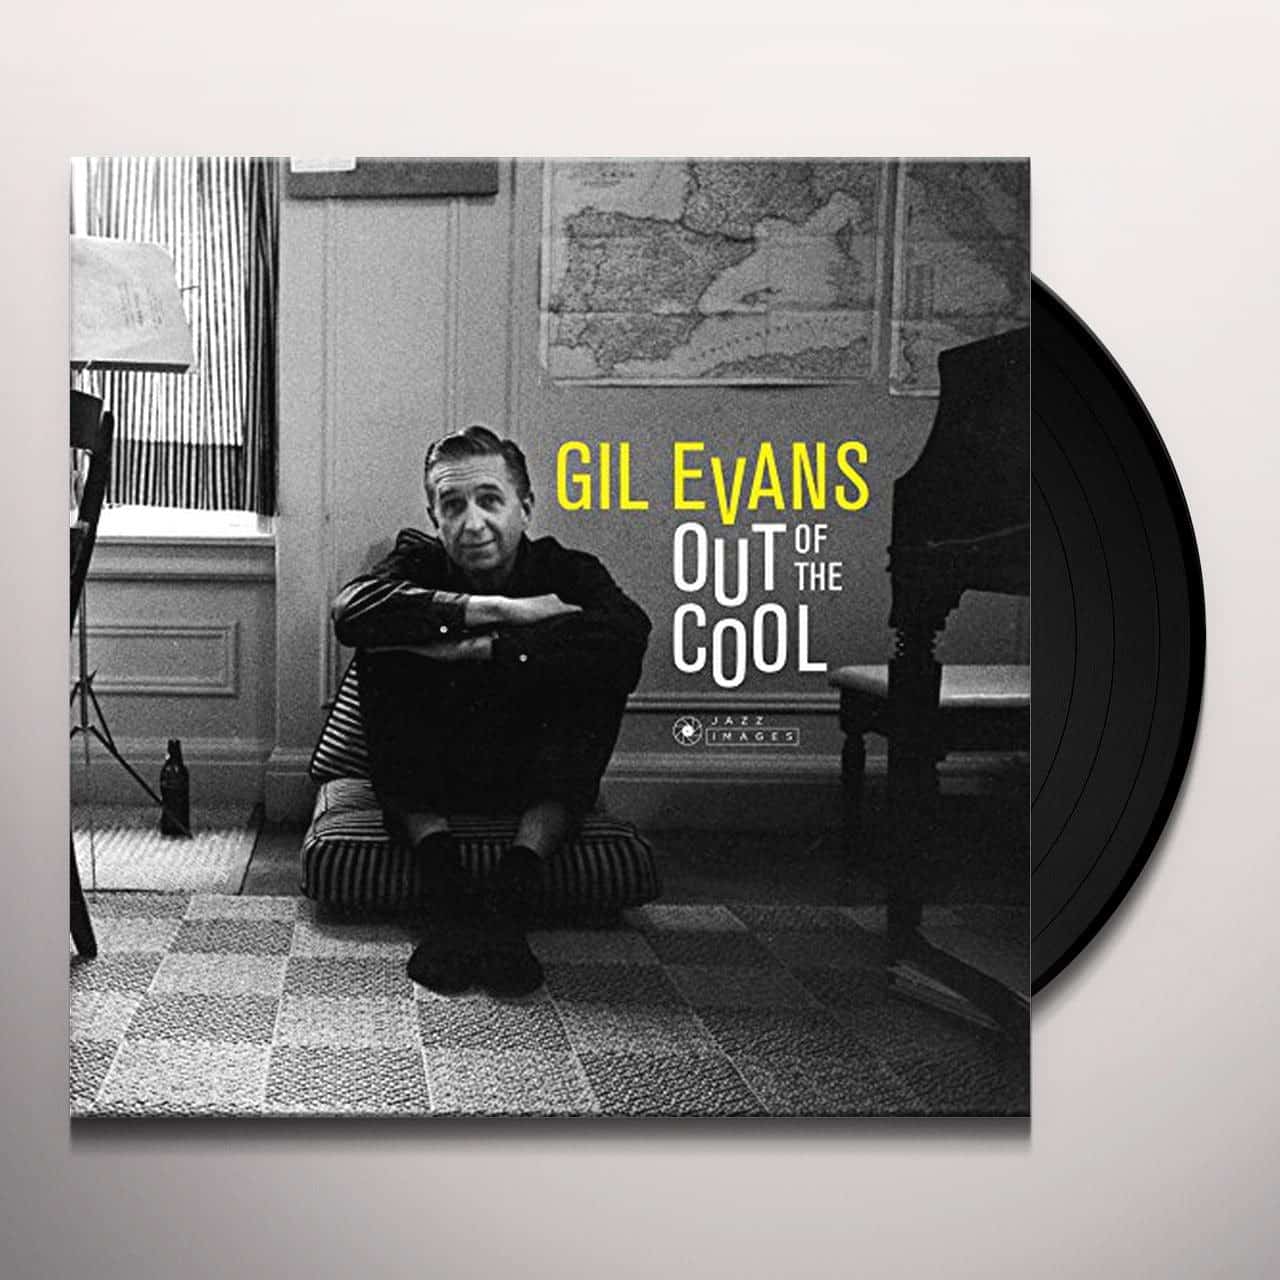 GIL EVANS - OUT OF THE COOL (WILLIAM CLAXTON EDITIONS)